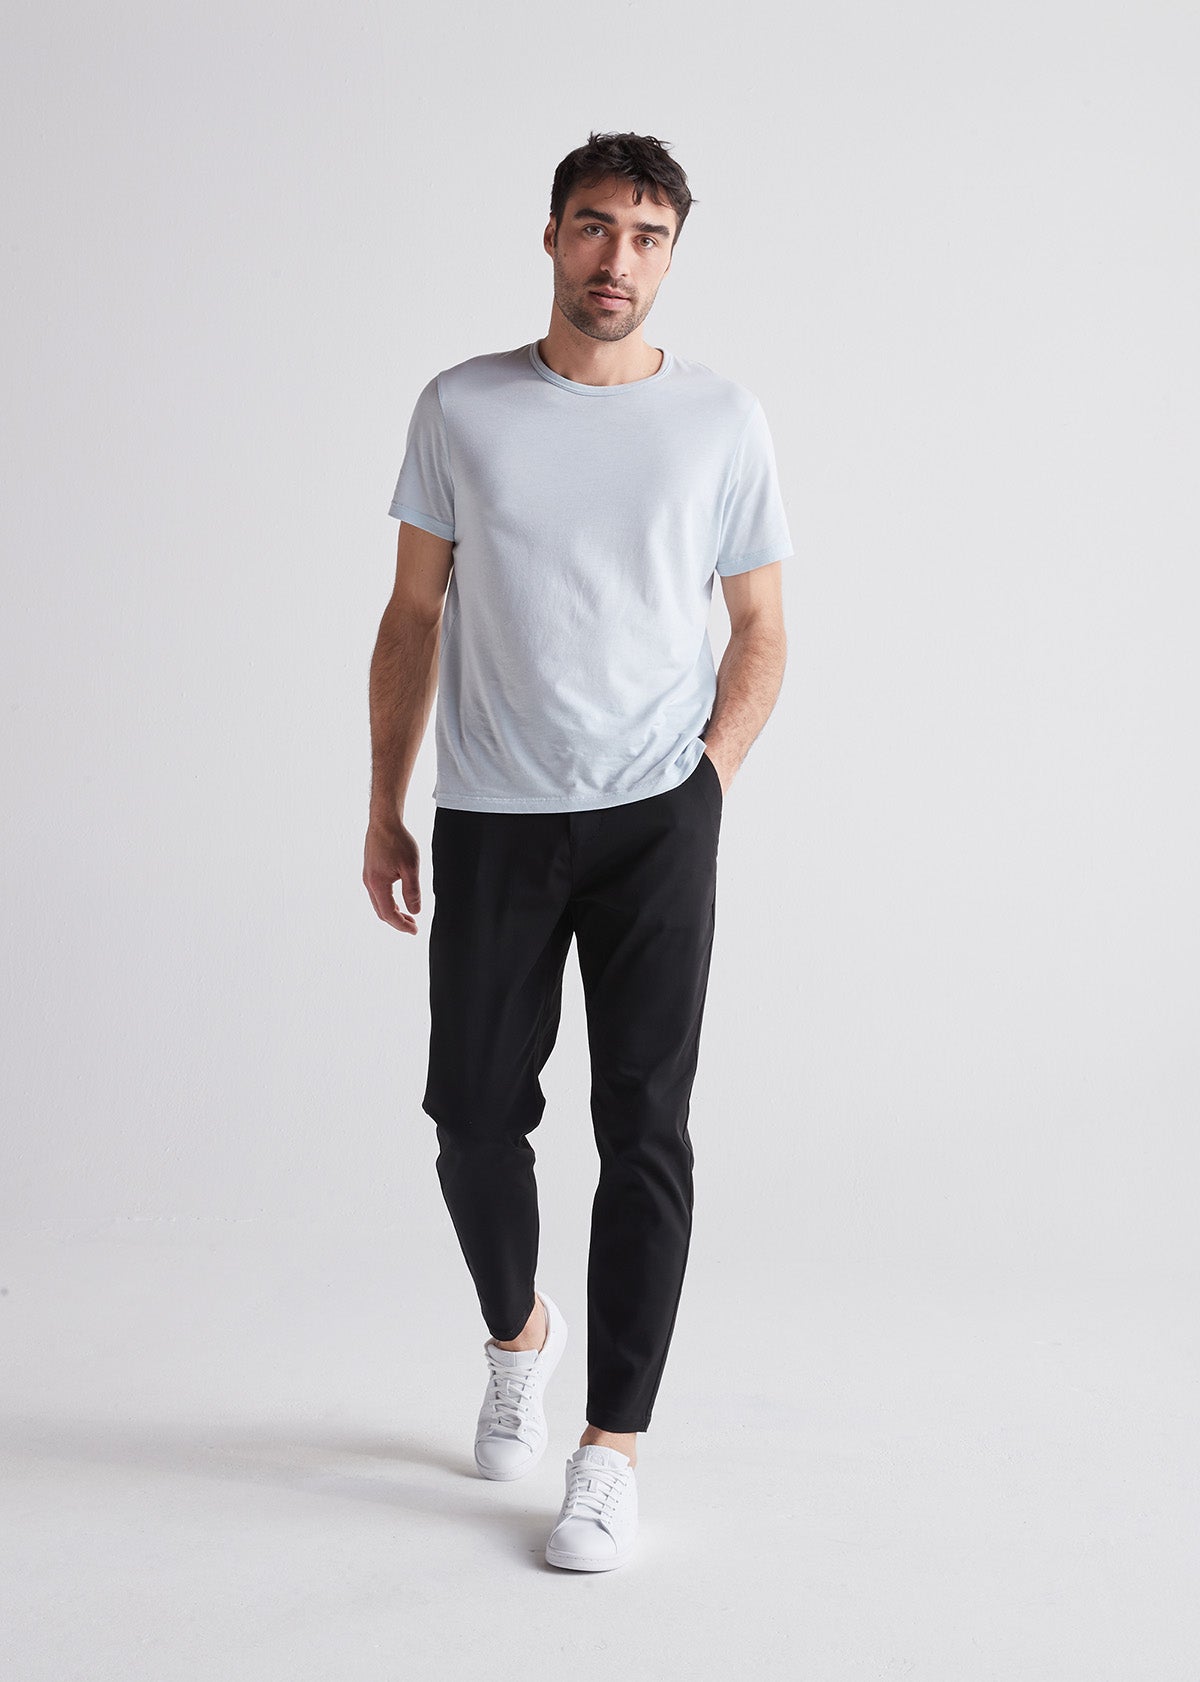 STRAIGHT MASCULINE TROUSERS - Black